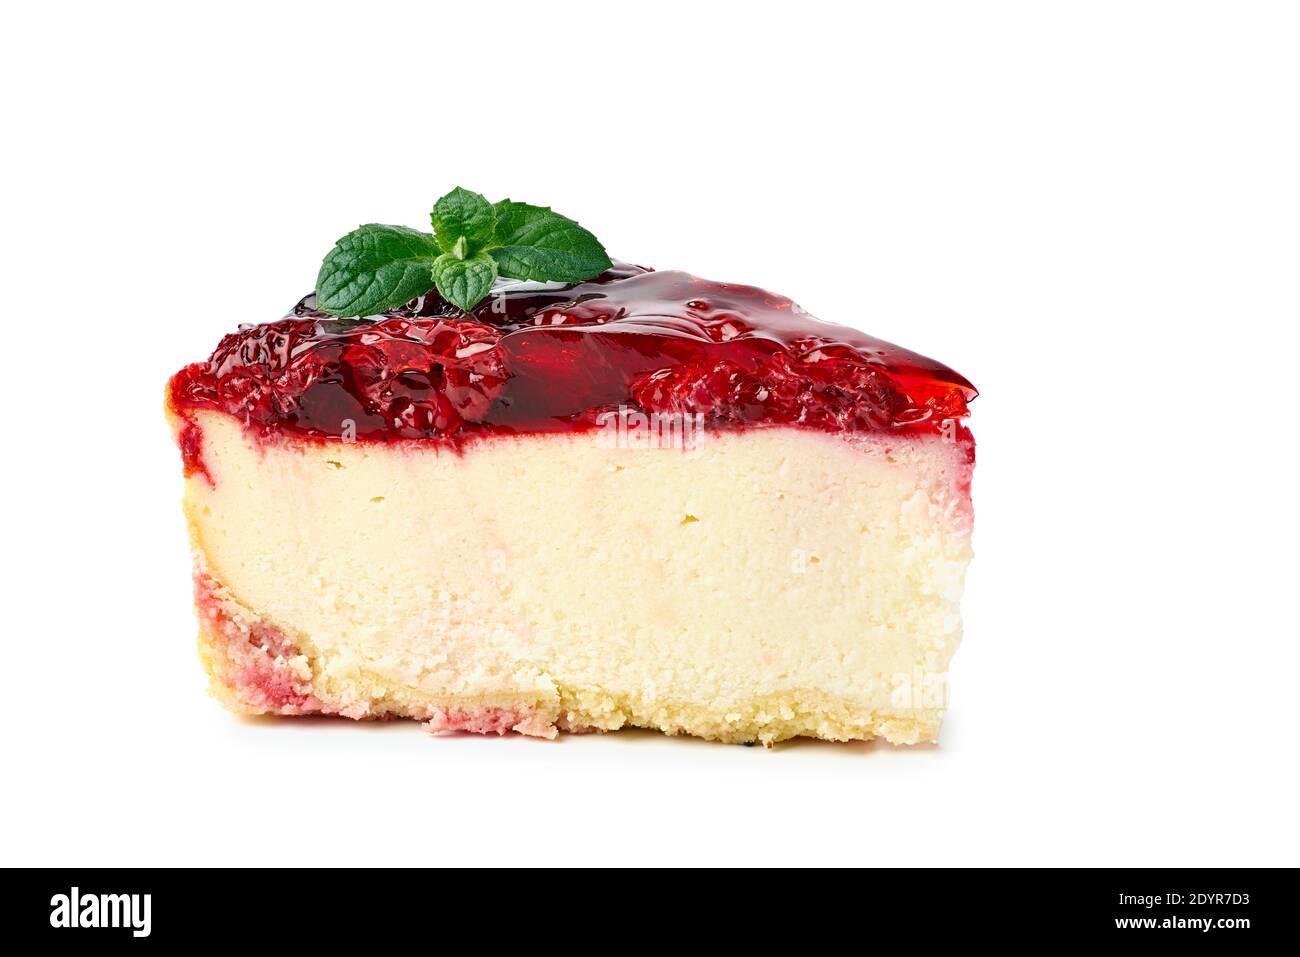 Piece of cheesecake with raspberries topping on white Stock Photo